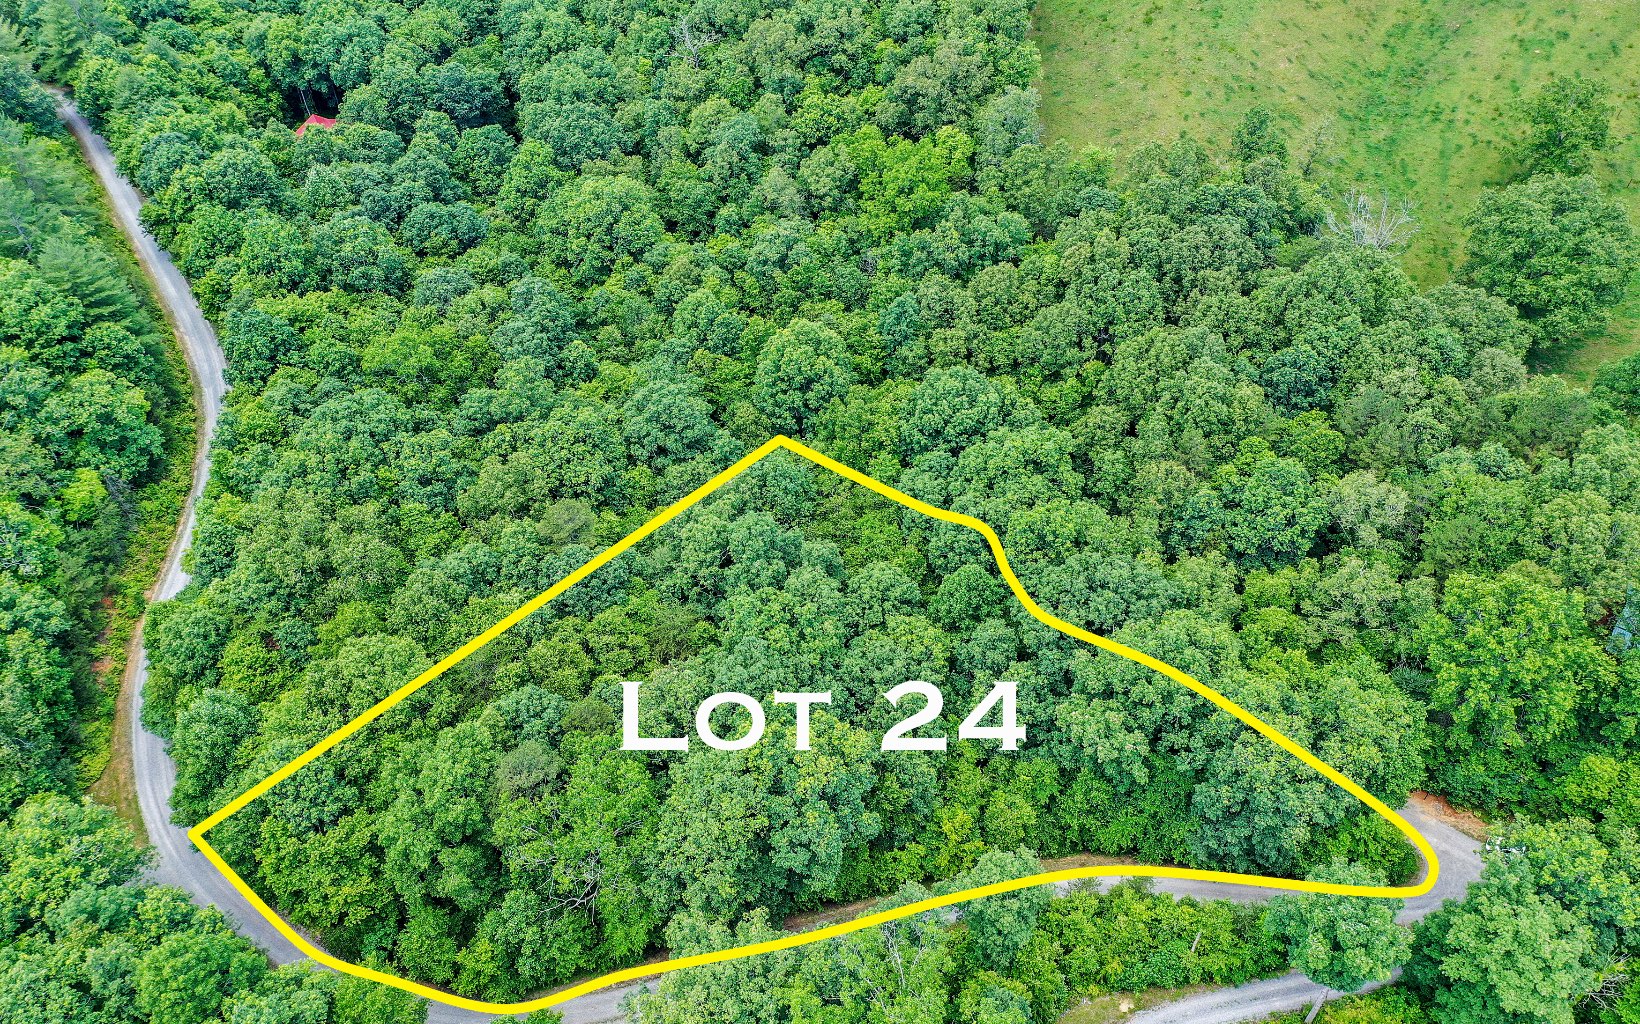 BEAUTIFUL large 2.25 acre BABBLING BROOK BUILDING LOT. Private Mountain Community with Community Water, Underground Power, Cable and High-speed internet available. Relax to the sound of a babbling brook running through the lot. Perfect Place to Build your Vacation or Full Time Home! ENJOY EVERYTHING NATURE HAS TO OFFER. Close to Whitewater Rafting, horse back riding, hiking and waterfalls. Ocoee River, tubing on the Toccoa River, Blue Ridge Lake & only minutes from the Cherokee National Forrest. Adjacent LOT 23 (1.16 acres) is for sale.